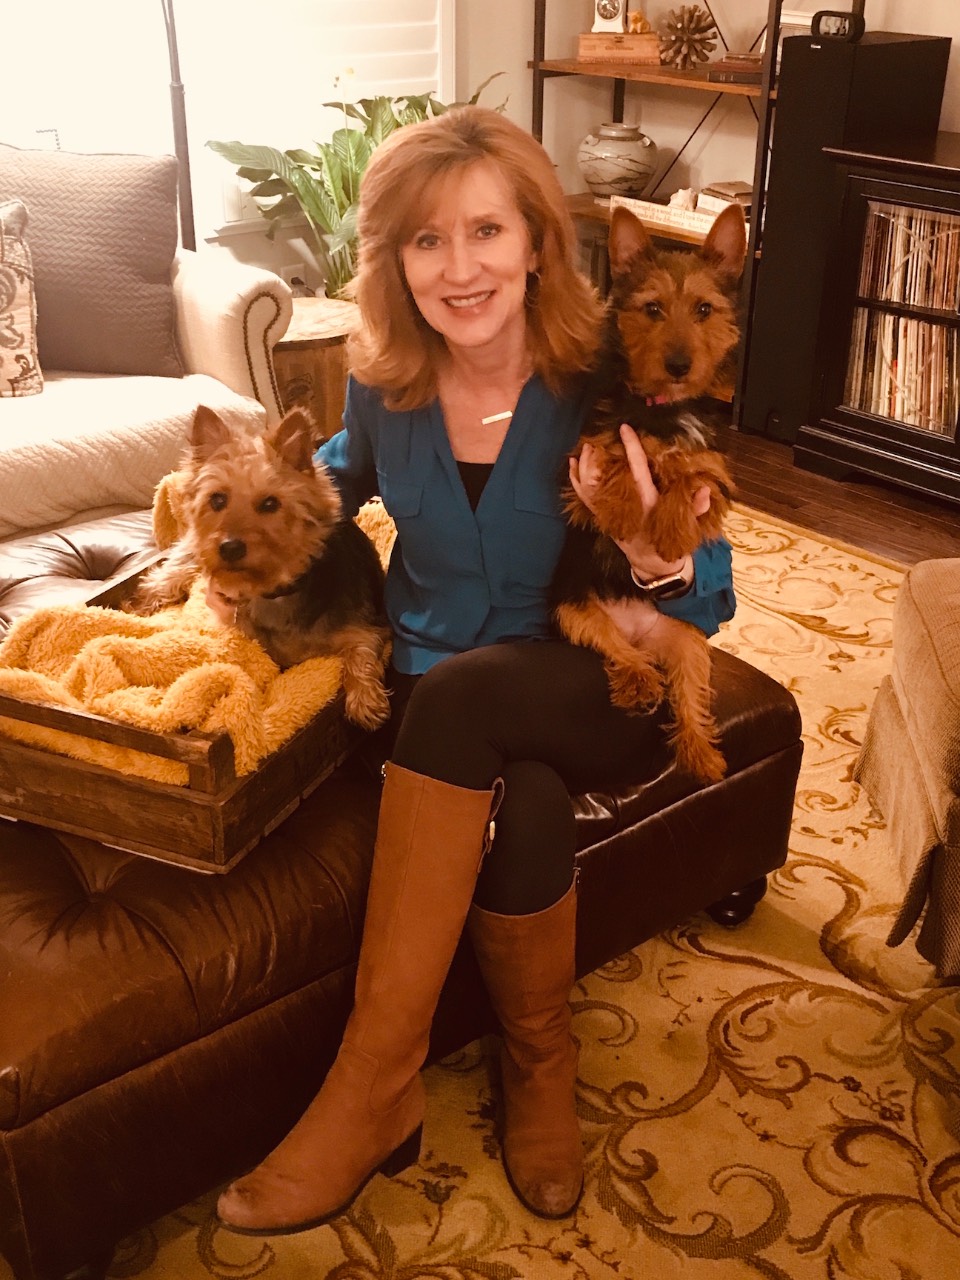 Tamera with Murphy (left) and Bailey (right) her sweet but slightly rowdy Australian Terriers